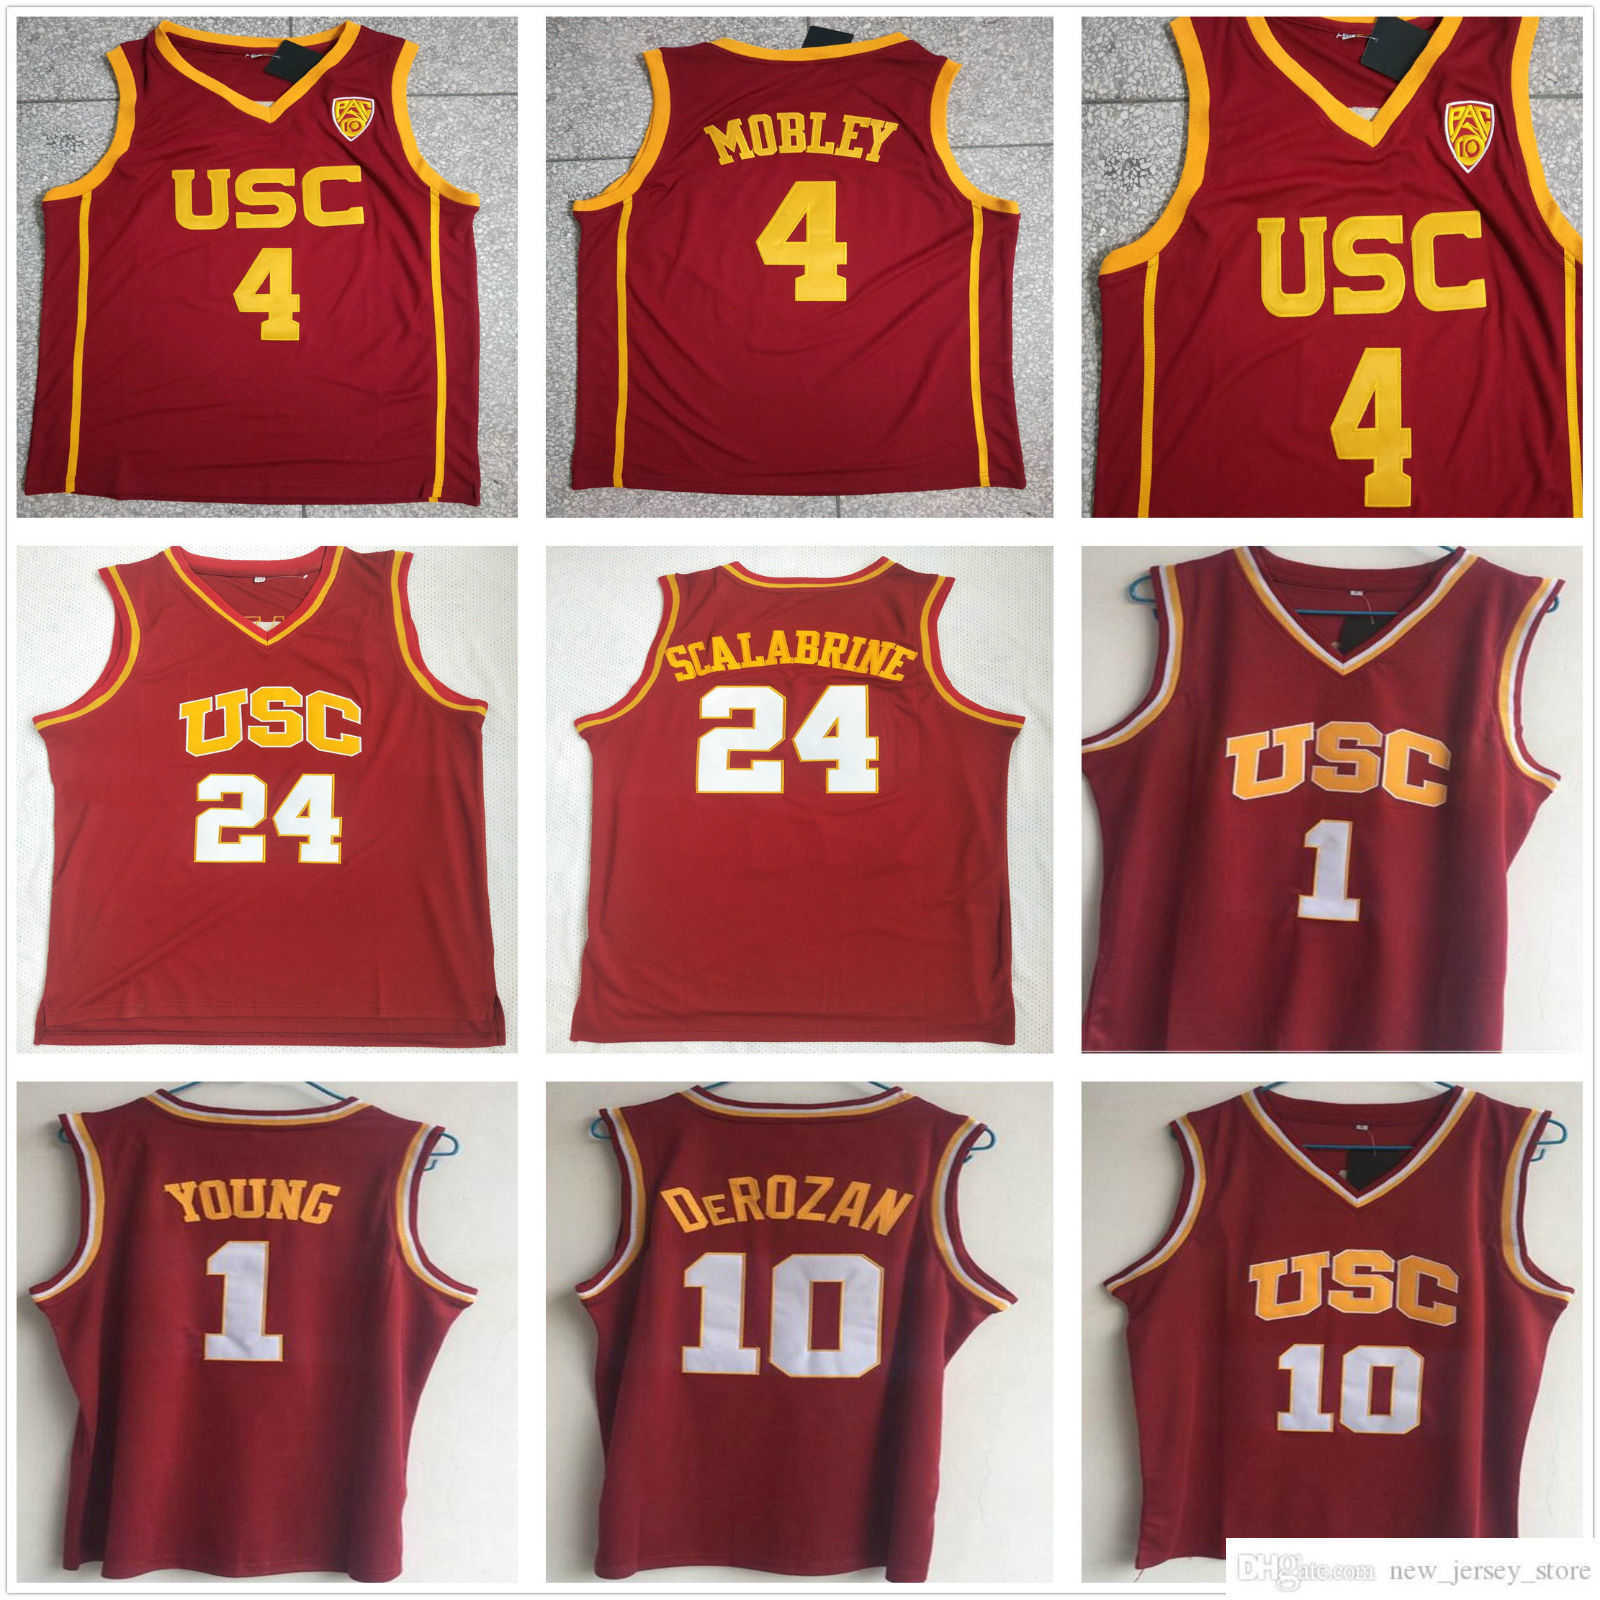 

Stitched Vintage NCAA USC Trojans College Basketball Jerseys 4 Evan Mobley 24 Brian Scalabrine Nick 1 Young DeMar 10 DeRozan Jersey Red Shirts, As picture